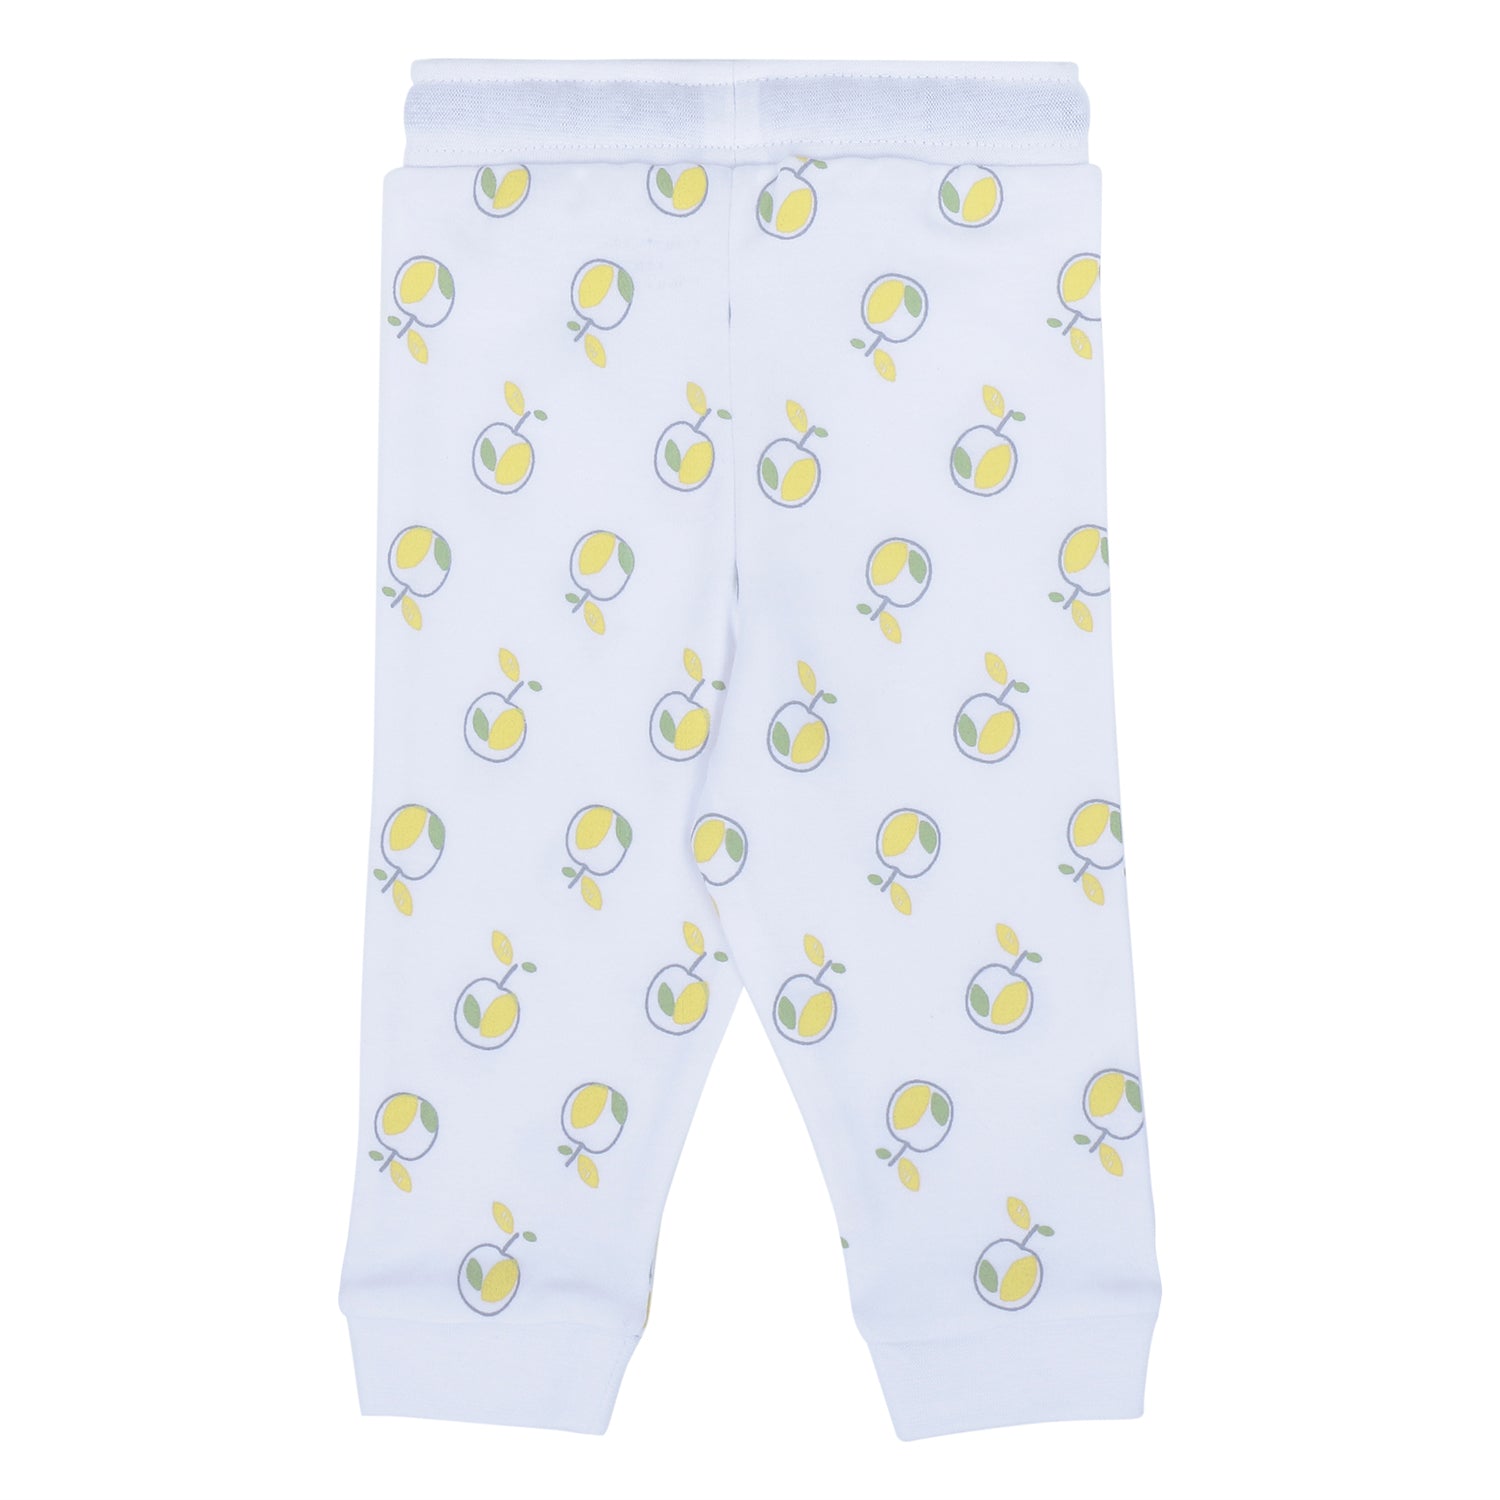 My Milestones Joggers - White Apples/ Baby Blue - 2 PC Pack